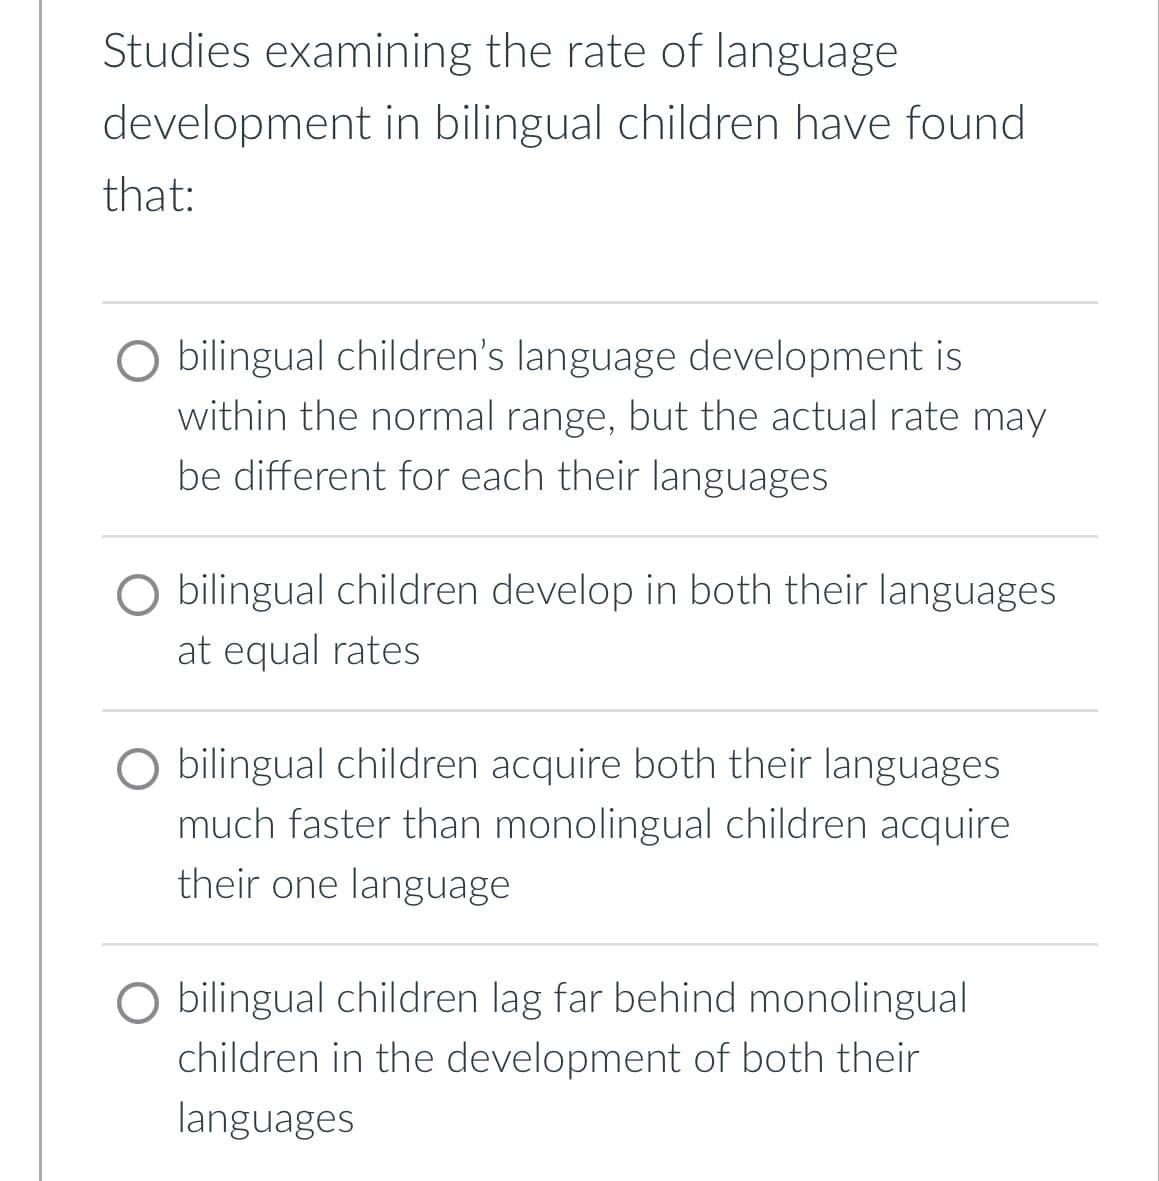 Studies examining the rate of language
development in bilingual children have found
that:
bilingual children's language development is
within the normal range, but the actual rate may
be different for each their languages
O bilingual children develop in both their languages
at equal rates
bilingual children acquire both their languages
much faster than monolingual children acquire
their one language
O bilingual children lag far behind monolingual
children in the development of both their
languages